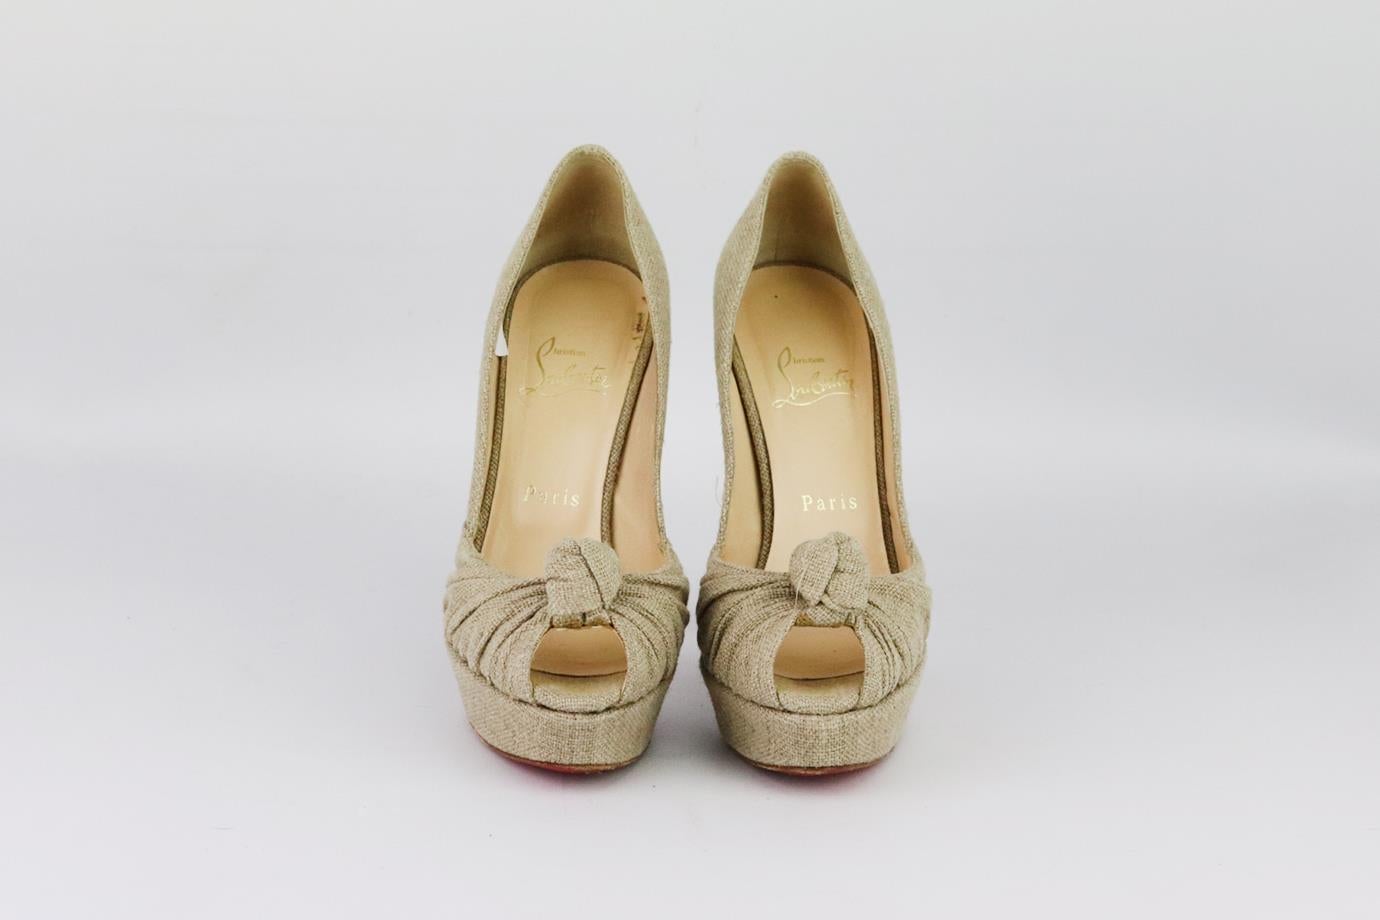 Christian Louboutin Greissimo jute platform pumps. Made from beige jute with twisted knot on the top, peep toe and set on the brand’s iconic red sole. Beige. Slips on. Does not come with box or dustbag. Size: EU 38 (UK 5, US 8). Insole: 9.4 in.